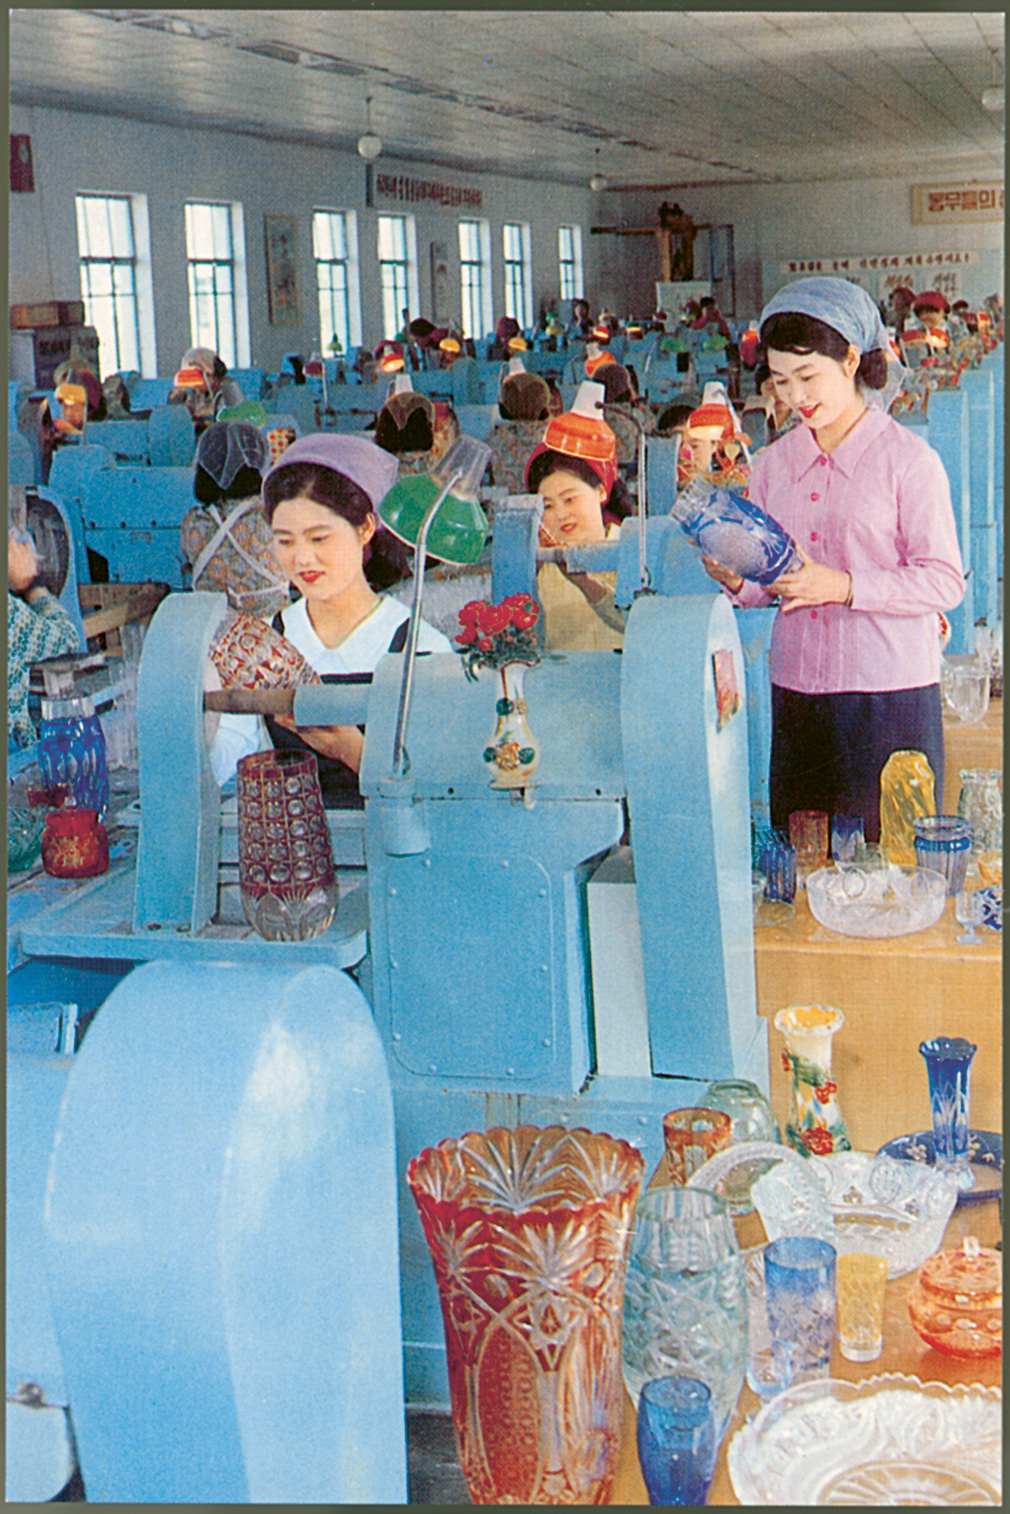 A postcard picturing Nampo glassworks, as featured in Made in North Korea